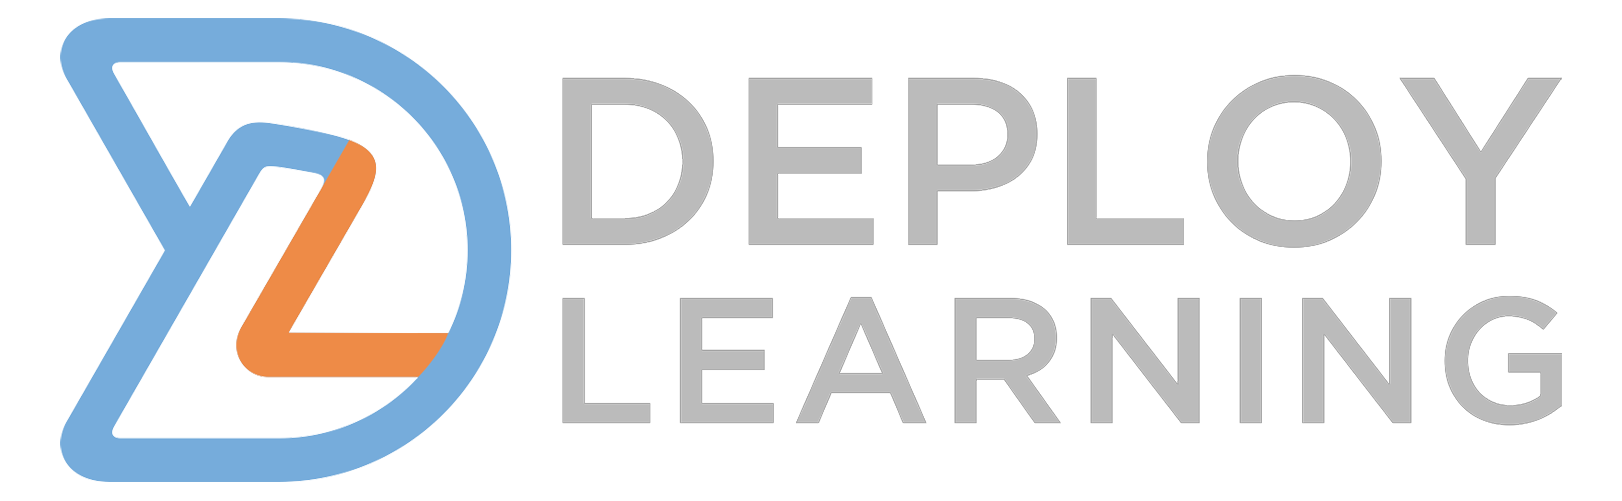 Deploy Learning